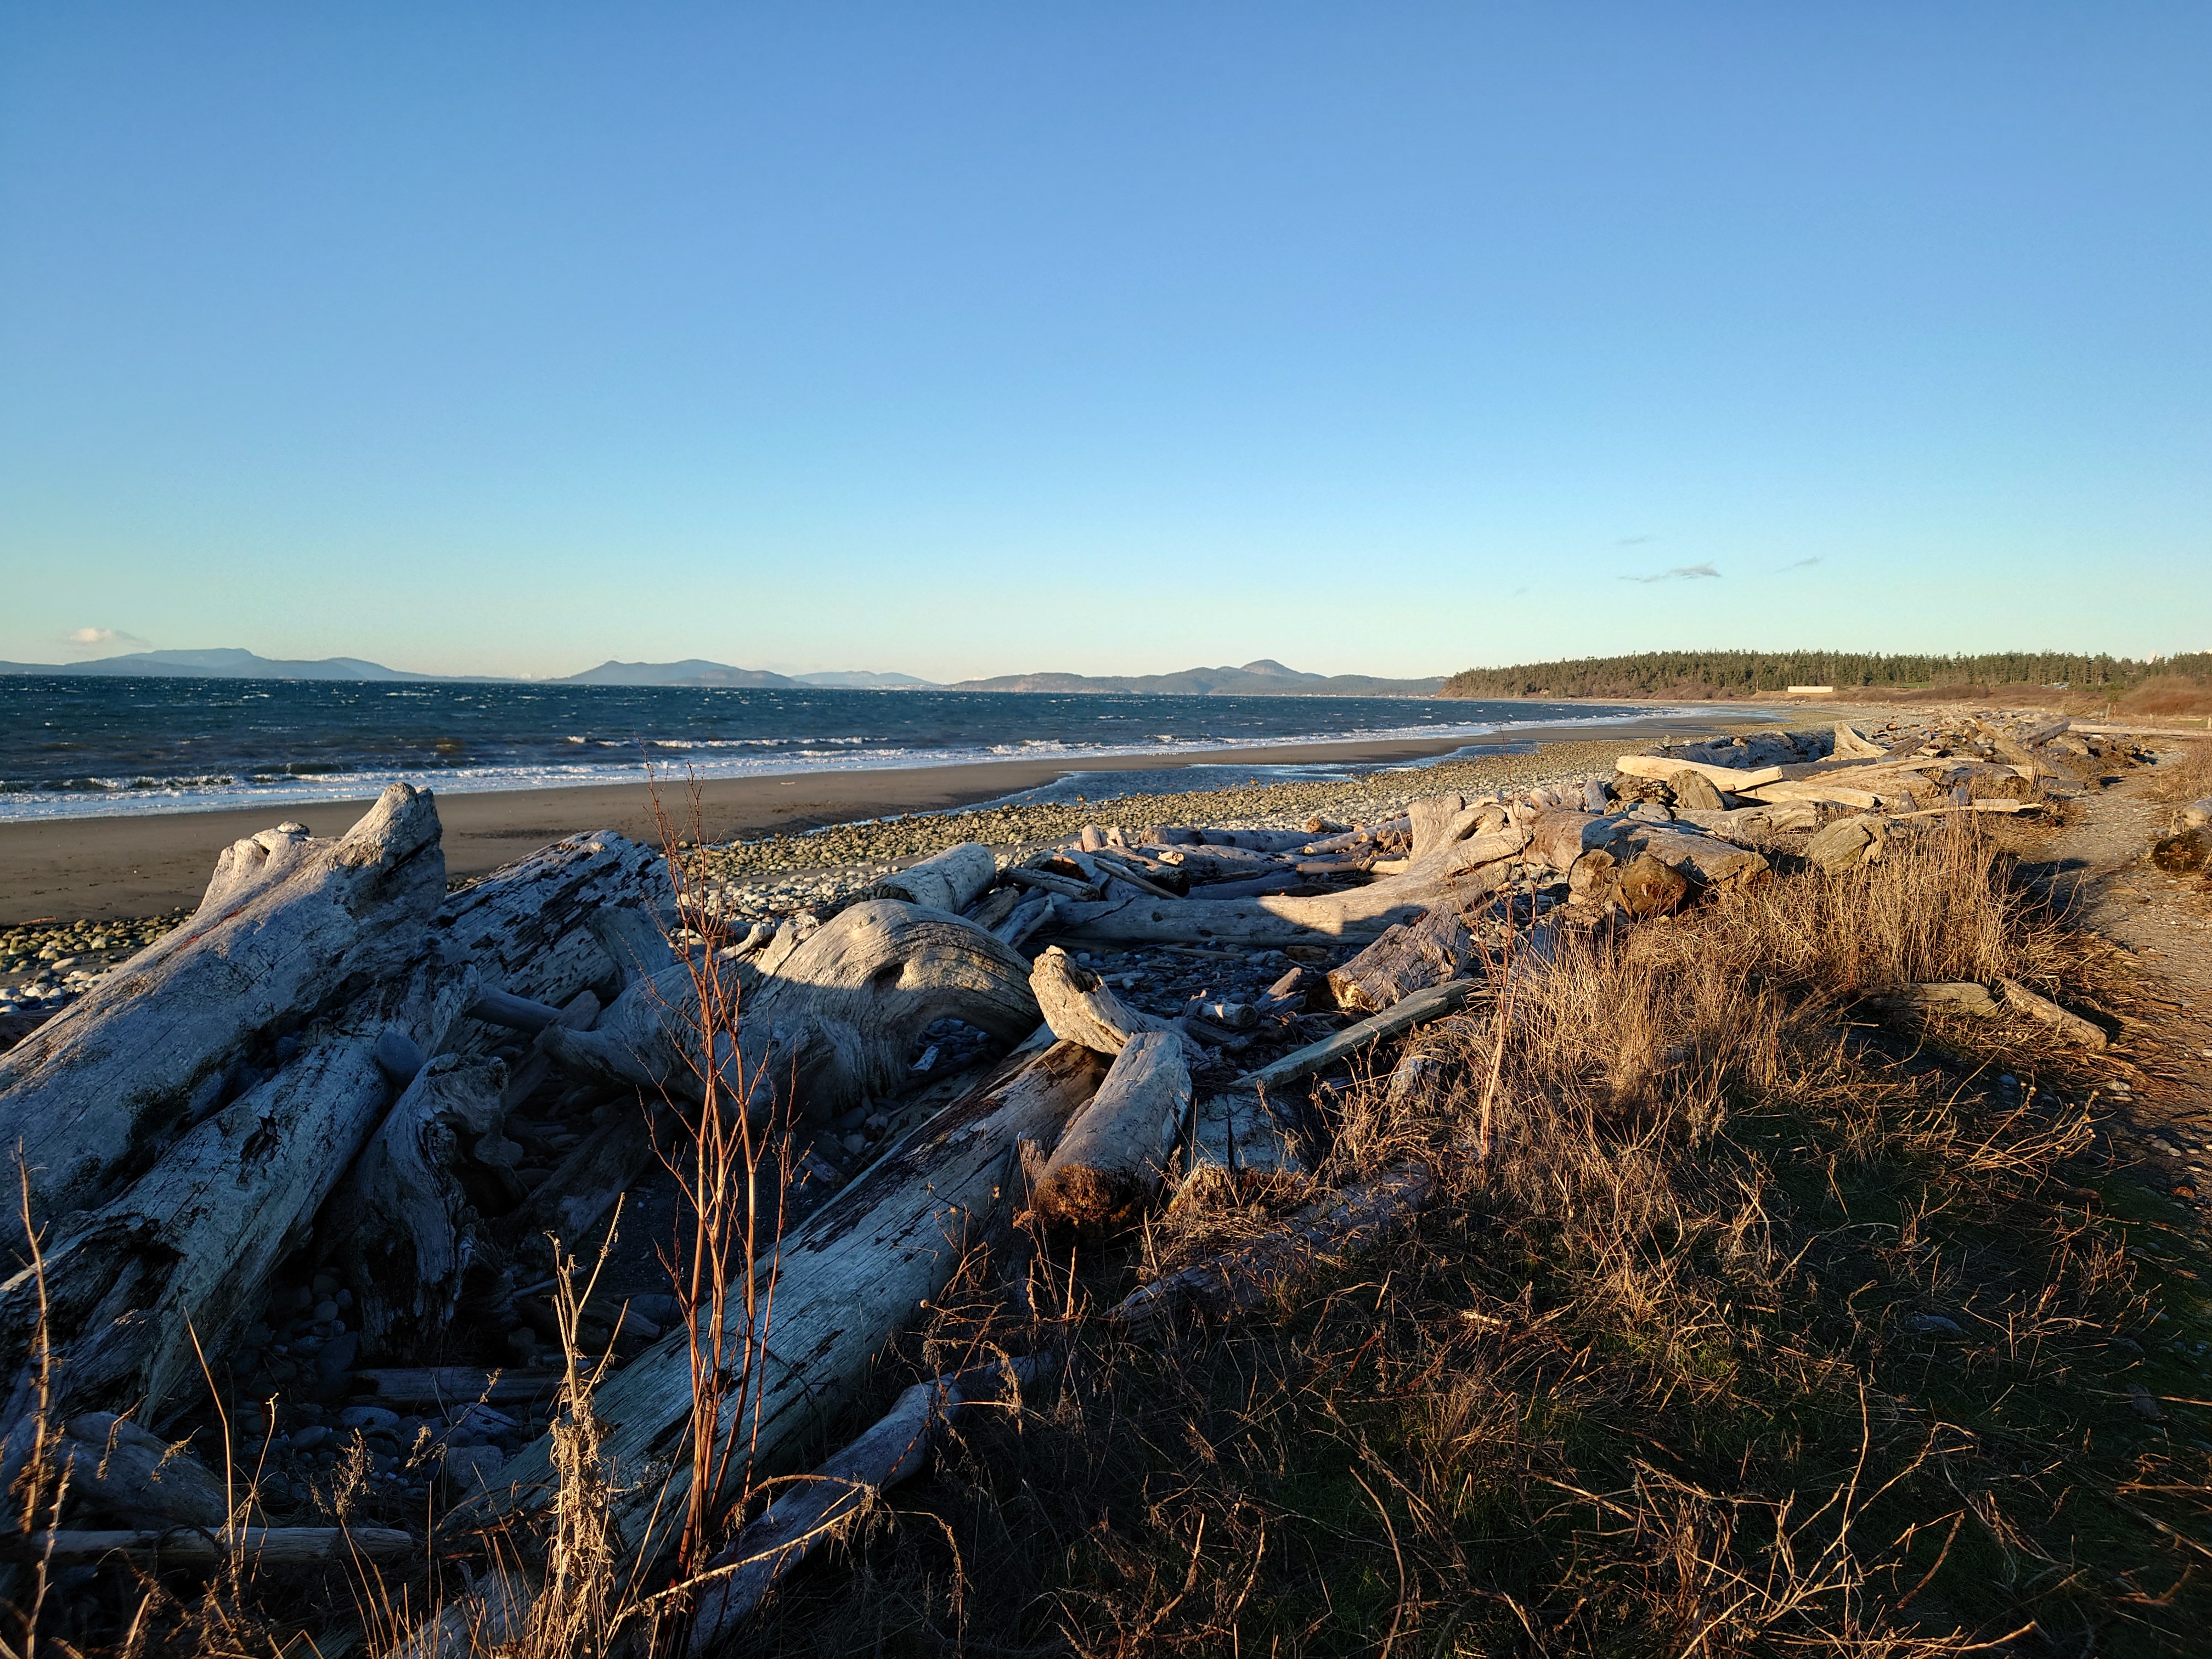 Beach on Whidbey Island with driftwood, rocky sand, and the ocean